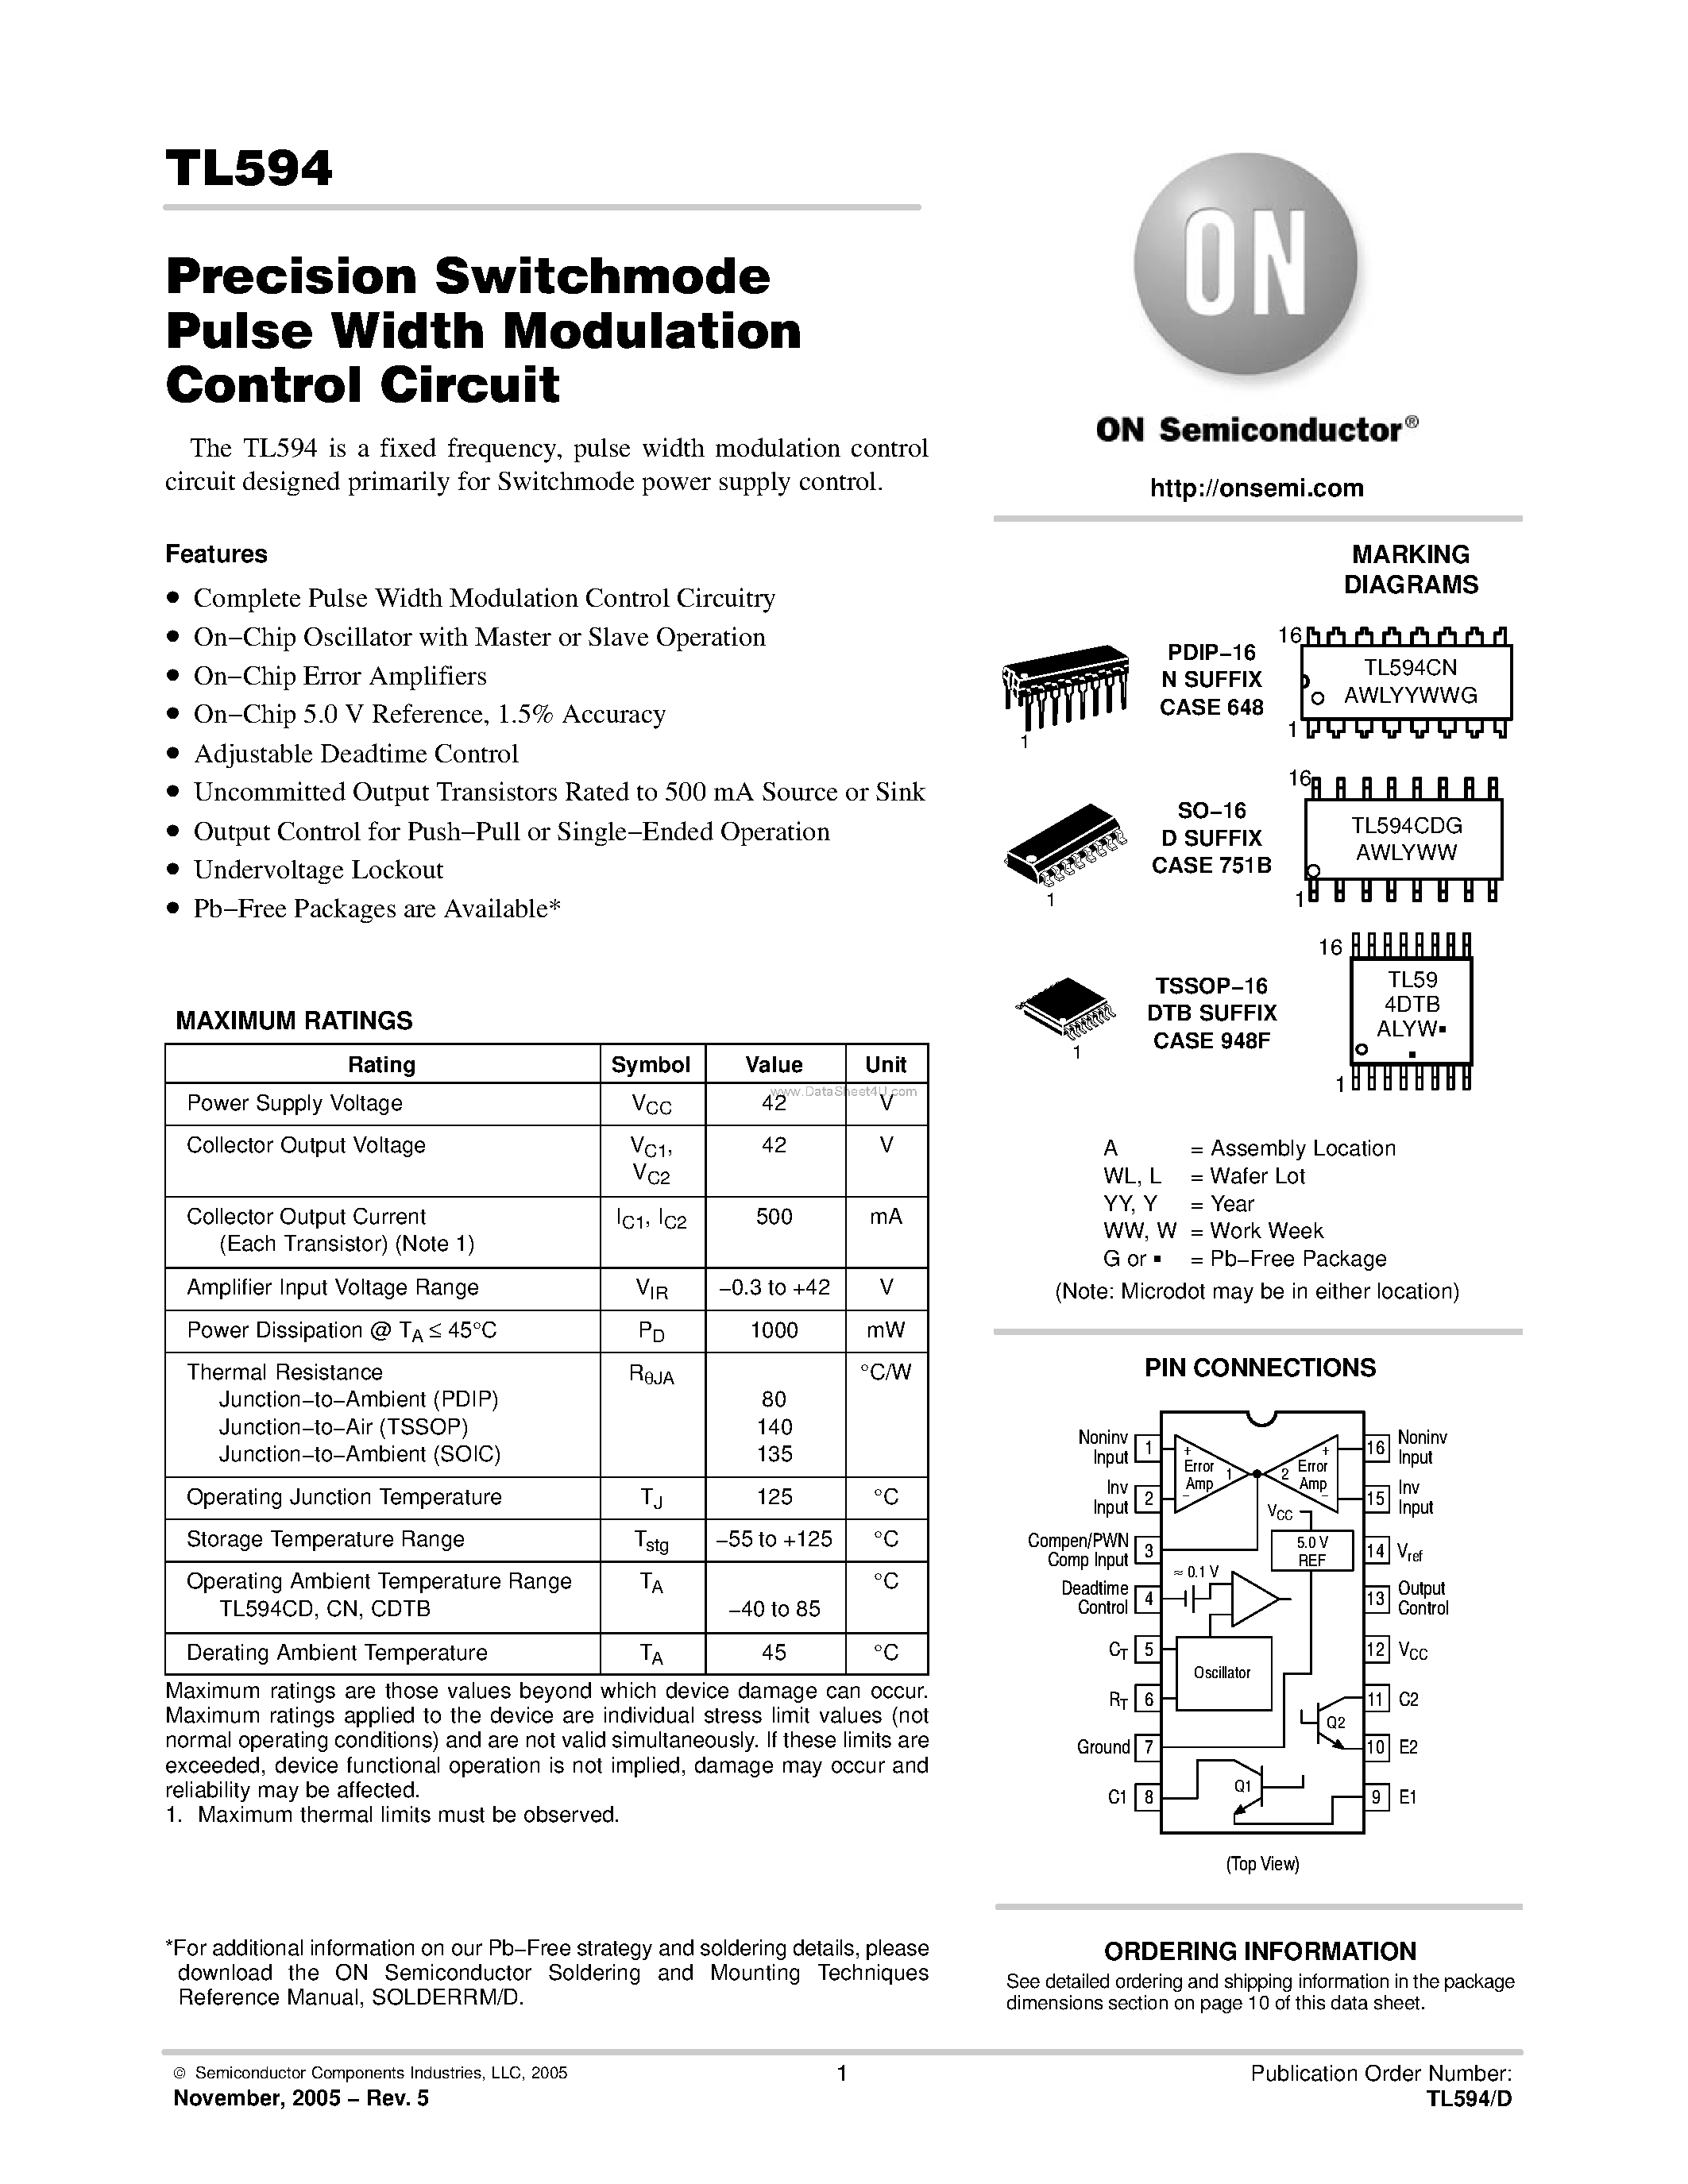 Datasheet TL594CD - PRECISION SWITCHMODE PULSE WIDTH MODULATION CONTROL CIRCUIT page 1